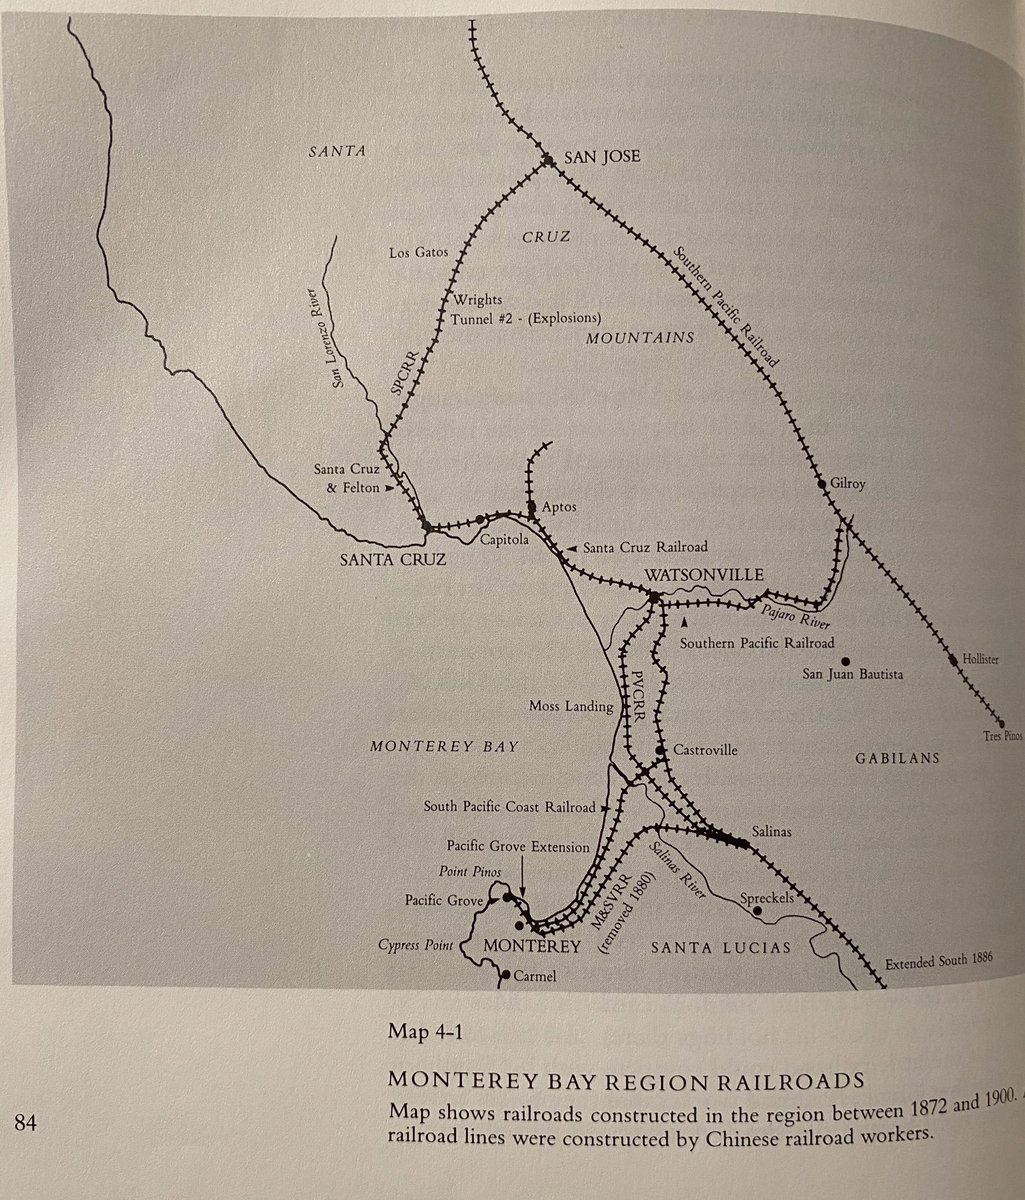 By 1880 Chinese railroad builders dug cuts, laid ballasts, drilled tunnels, built trestles, laid track, and risked death to build almost 100 miles of track, bringing Santa Cruz and Monterey counties into the industrial age.